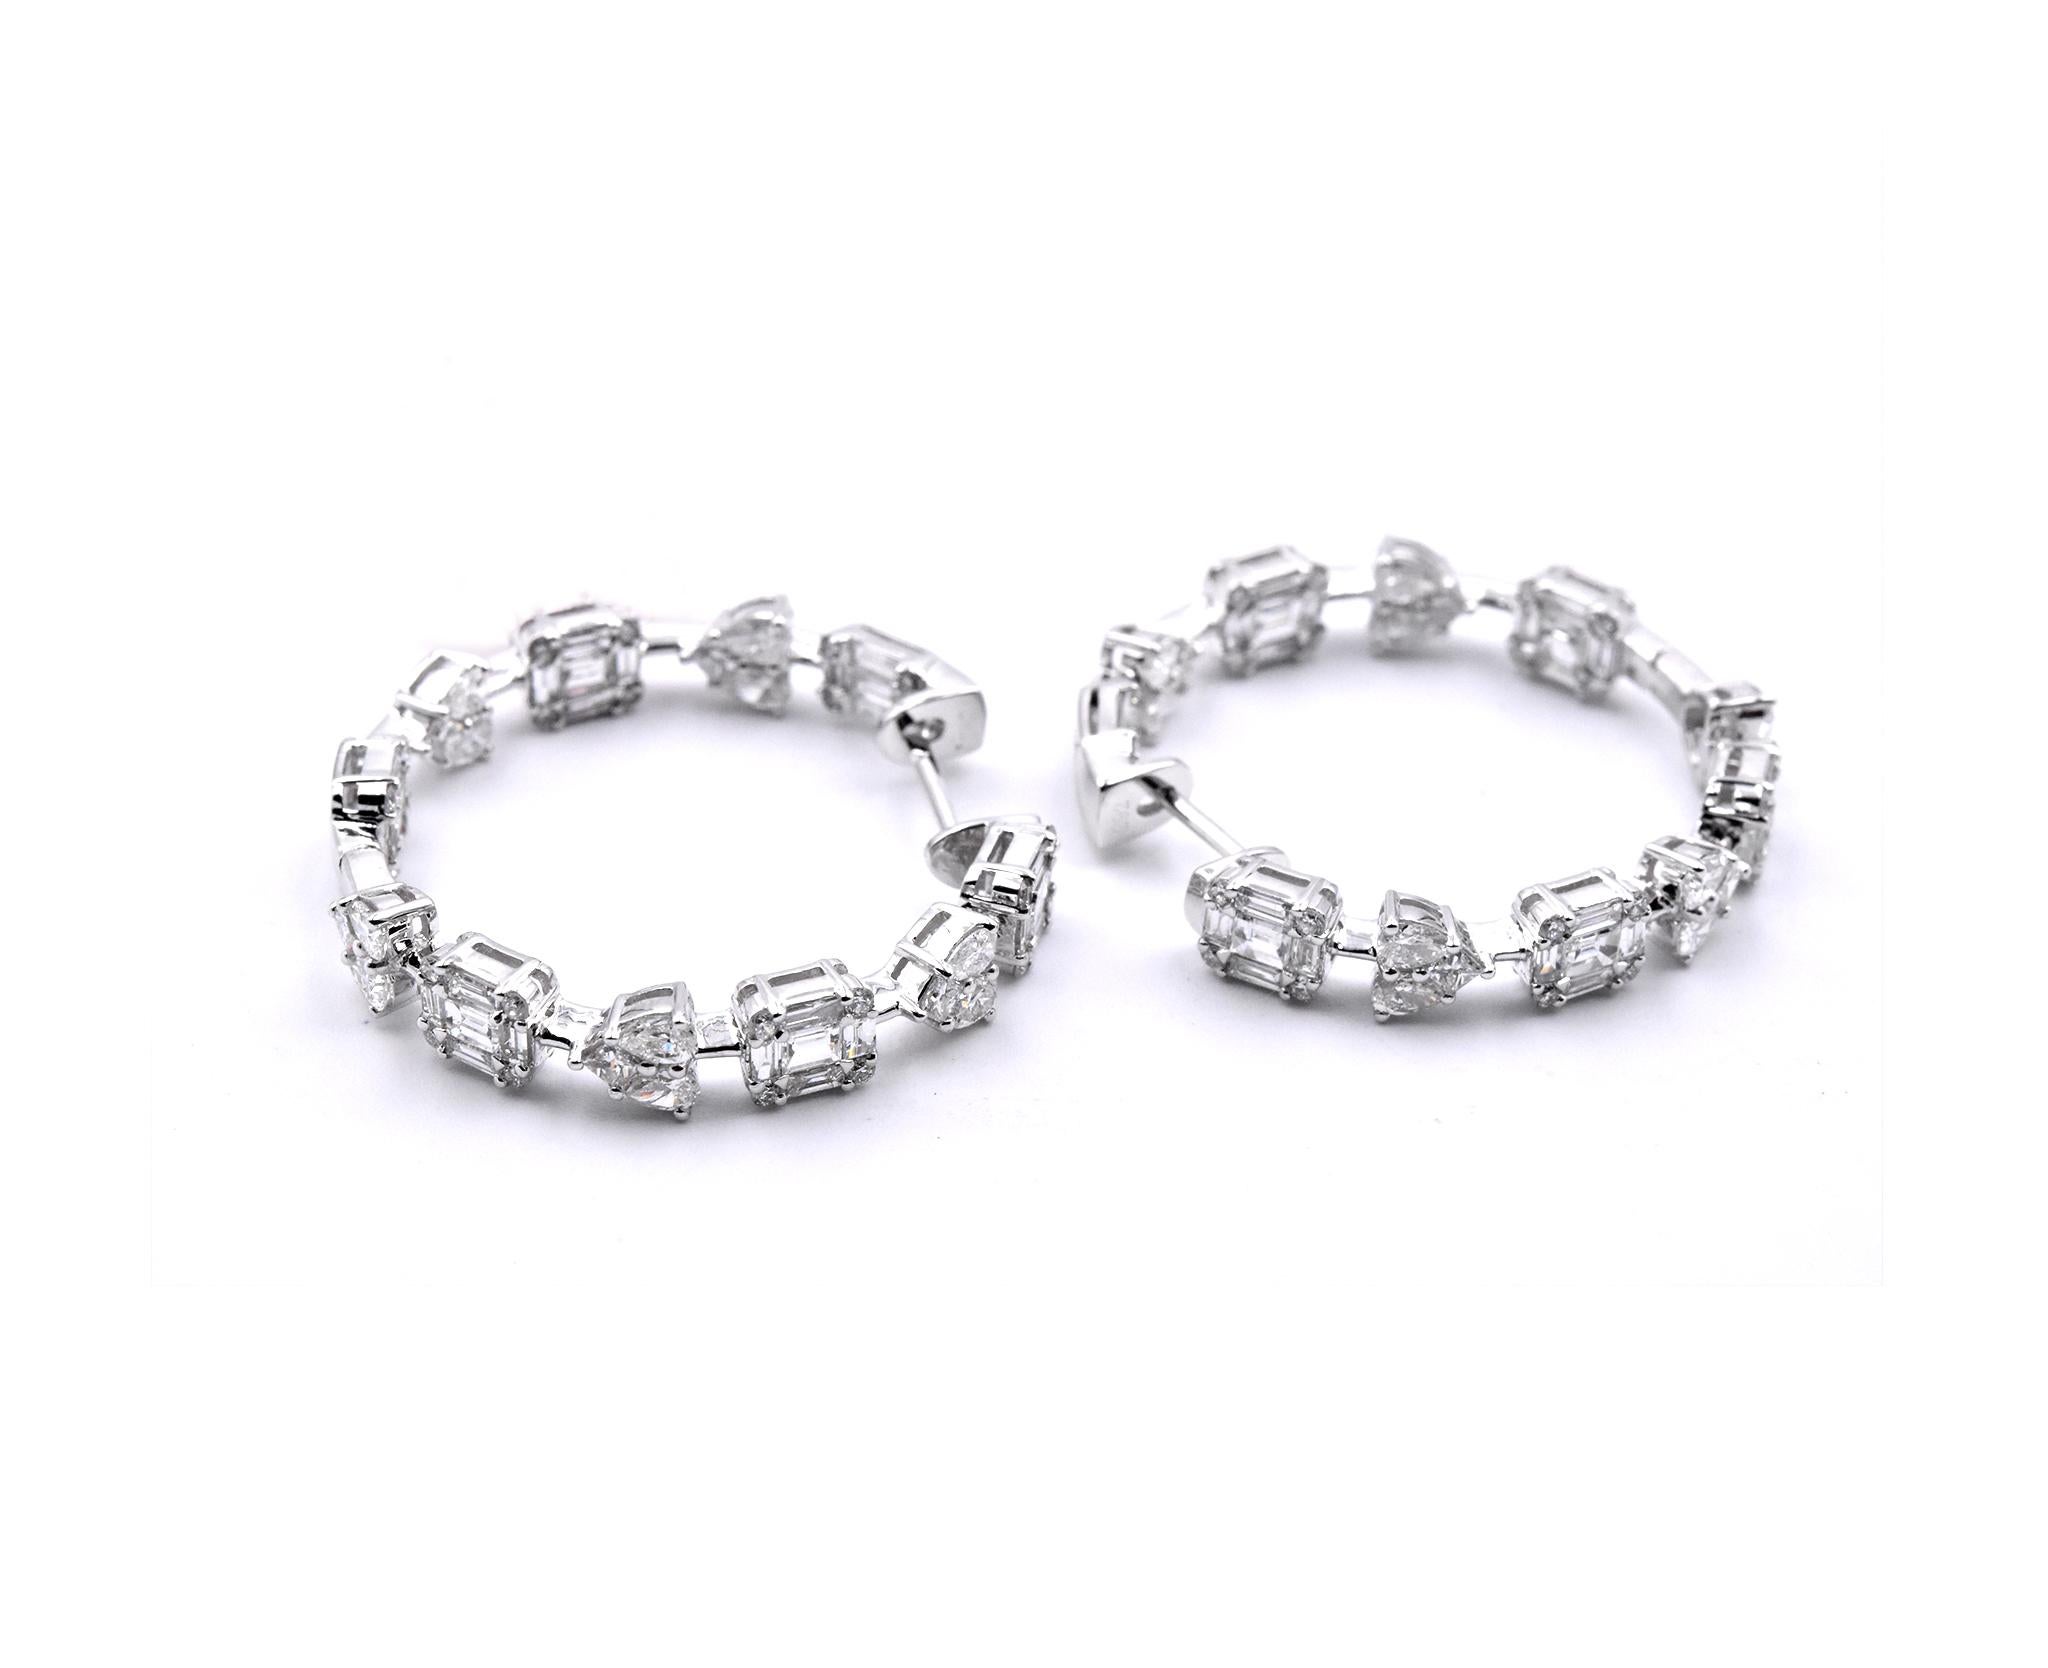 Material: 18k white gold
Diamonds:  56 round brilliant cuts = 1.07cttw
Color: G
Clarity: VS
Diamonds: 80 baguette cuts = 2.25cttw
Color: G 
Clarity: VS
Dimensions: earrings measure 31.00mm by 5.13mm
Fastenings: post with locking back
Weight: 9.08